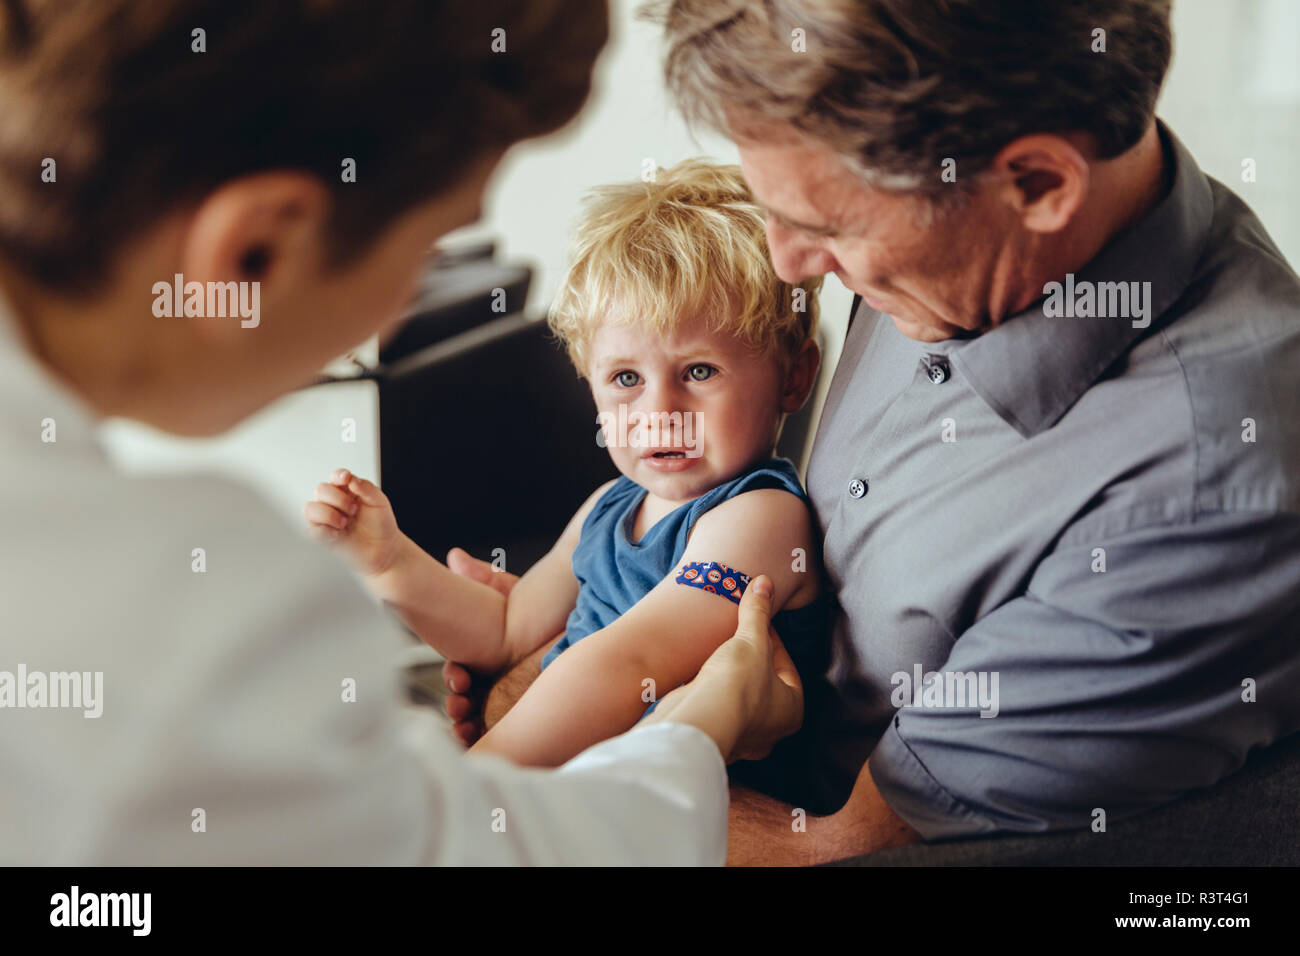 Father and son consulting a pedeatrician Stock Photo